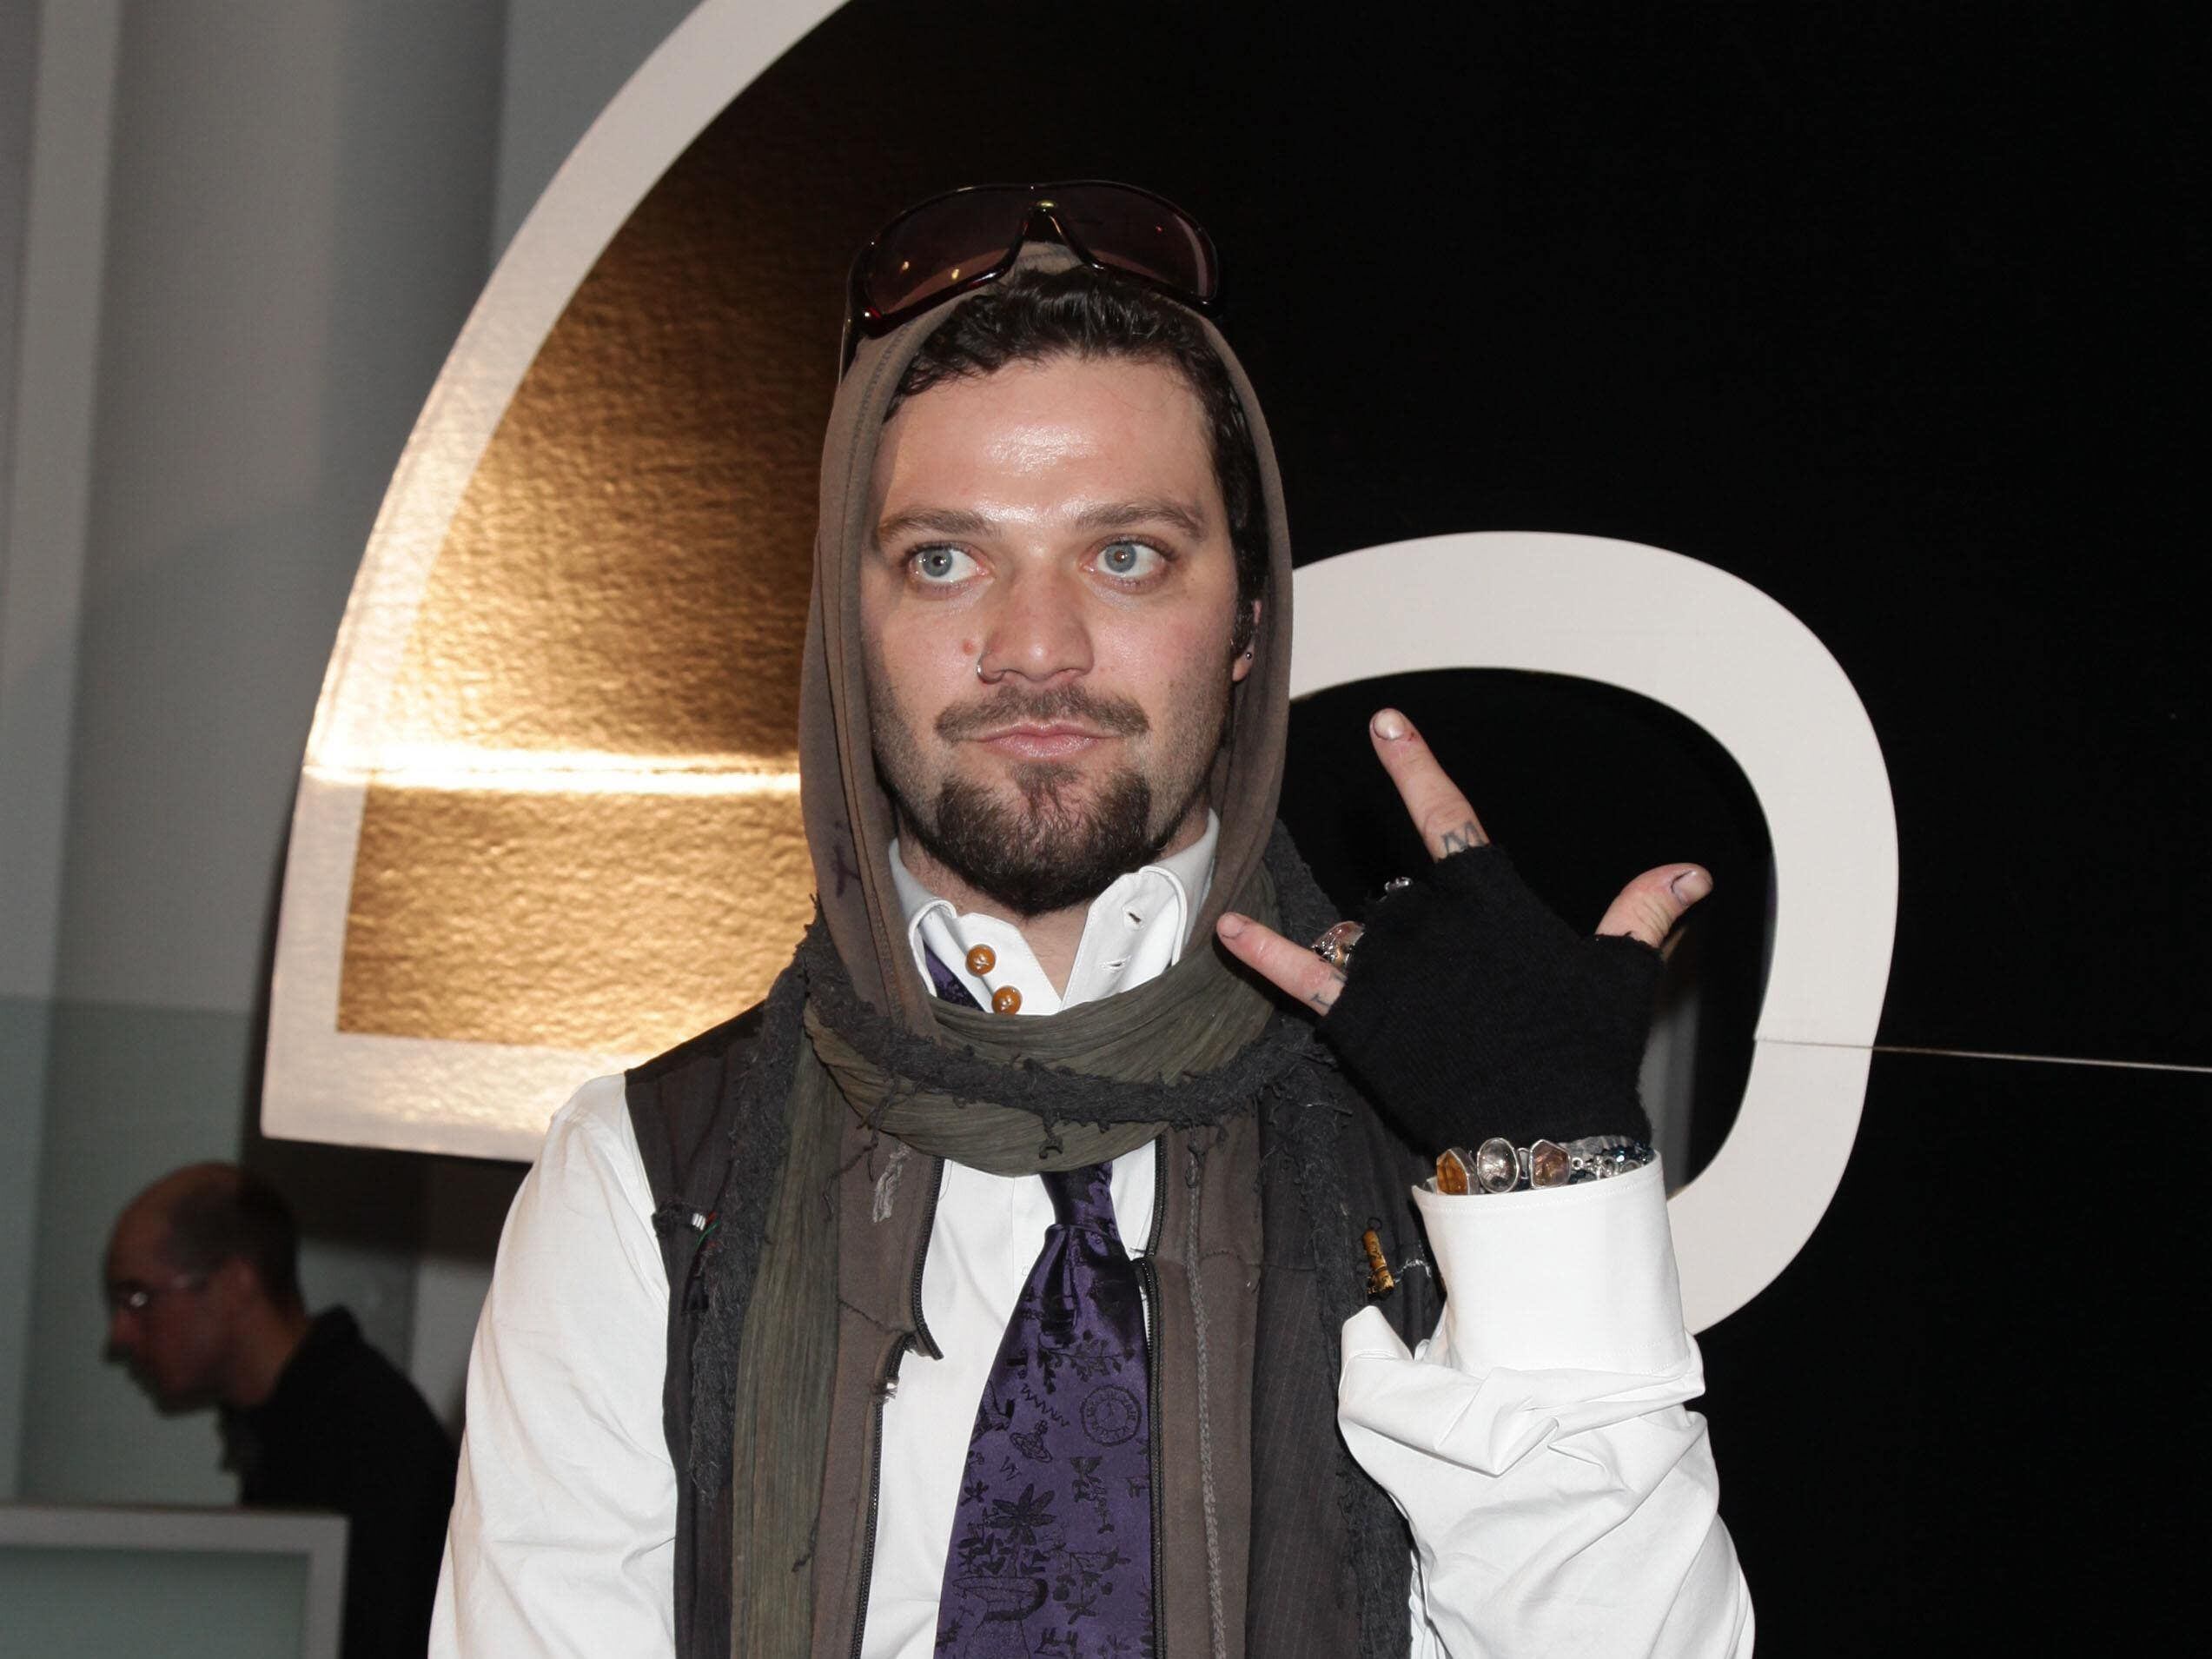 Ex-Jackass star Bam Margera handed probation after plea over family altercation